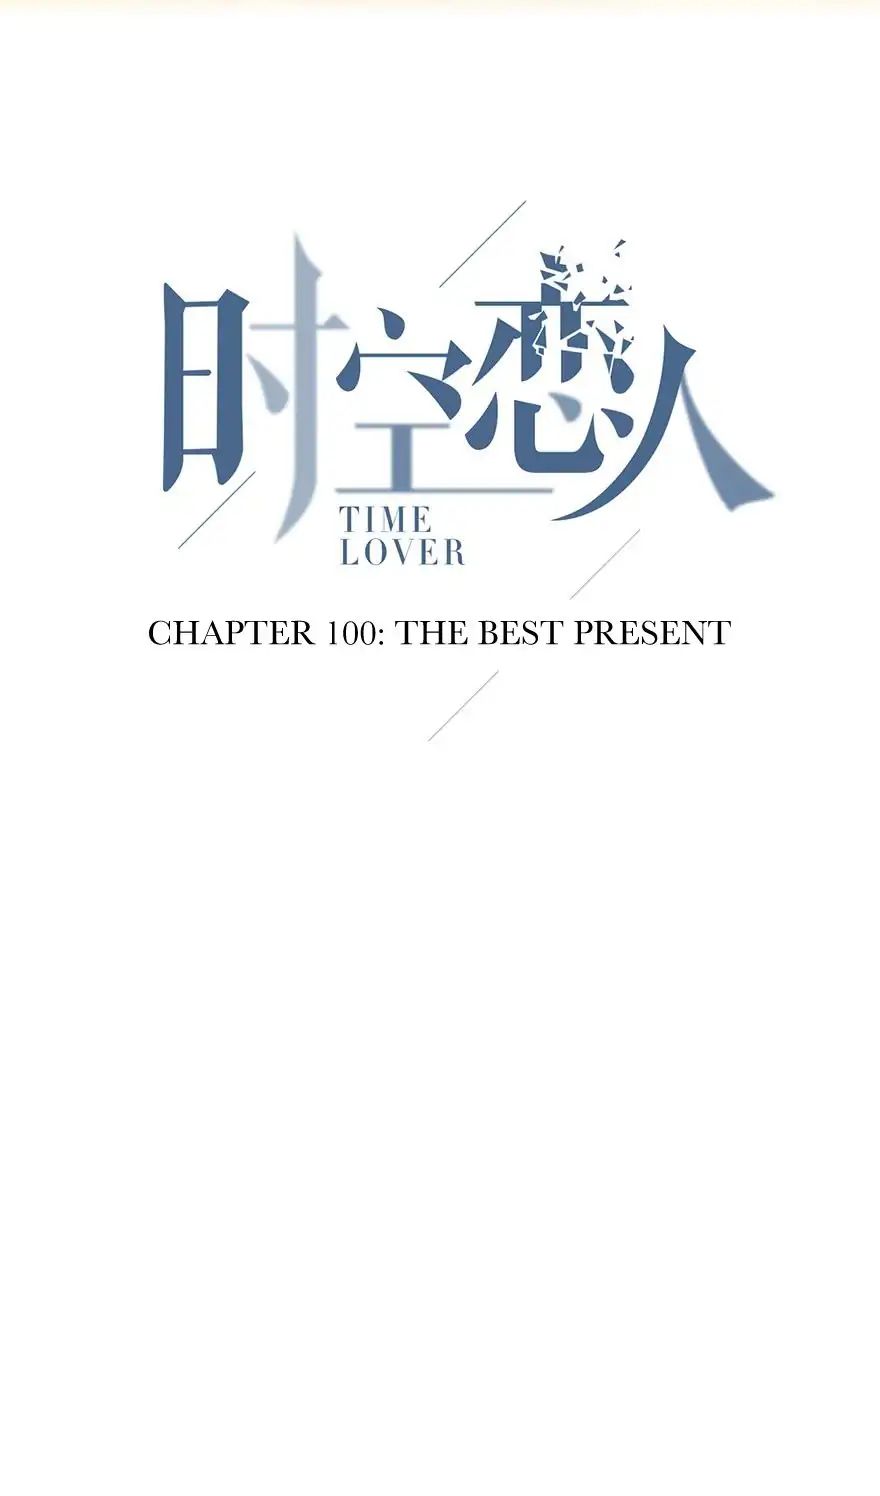 Time Lover Chapter 100: The Best Present